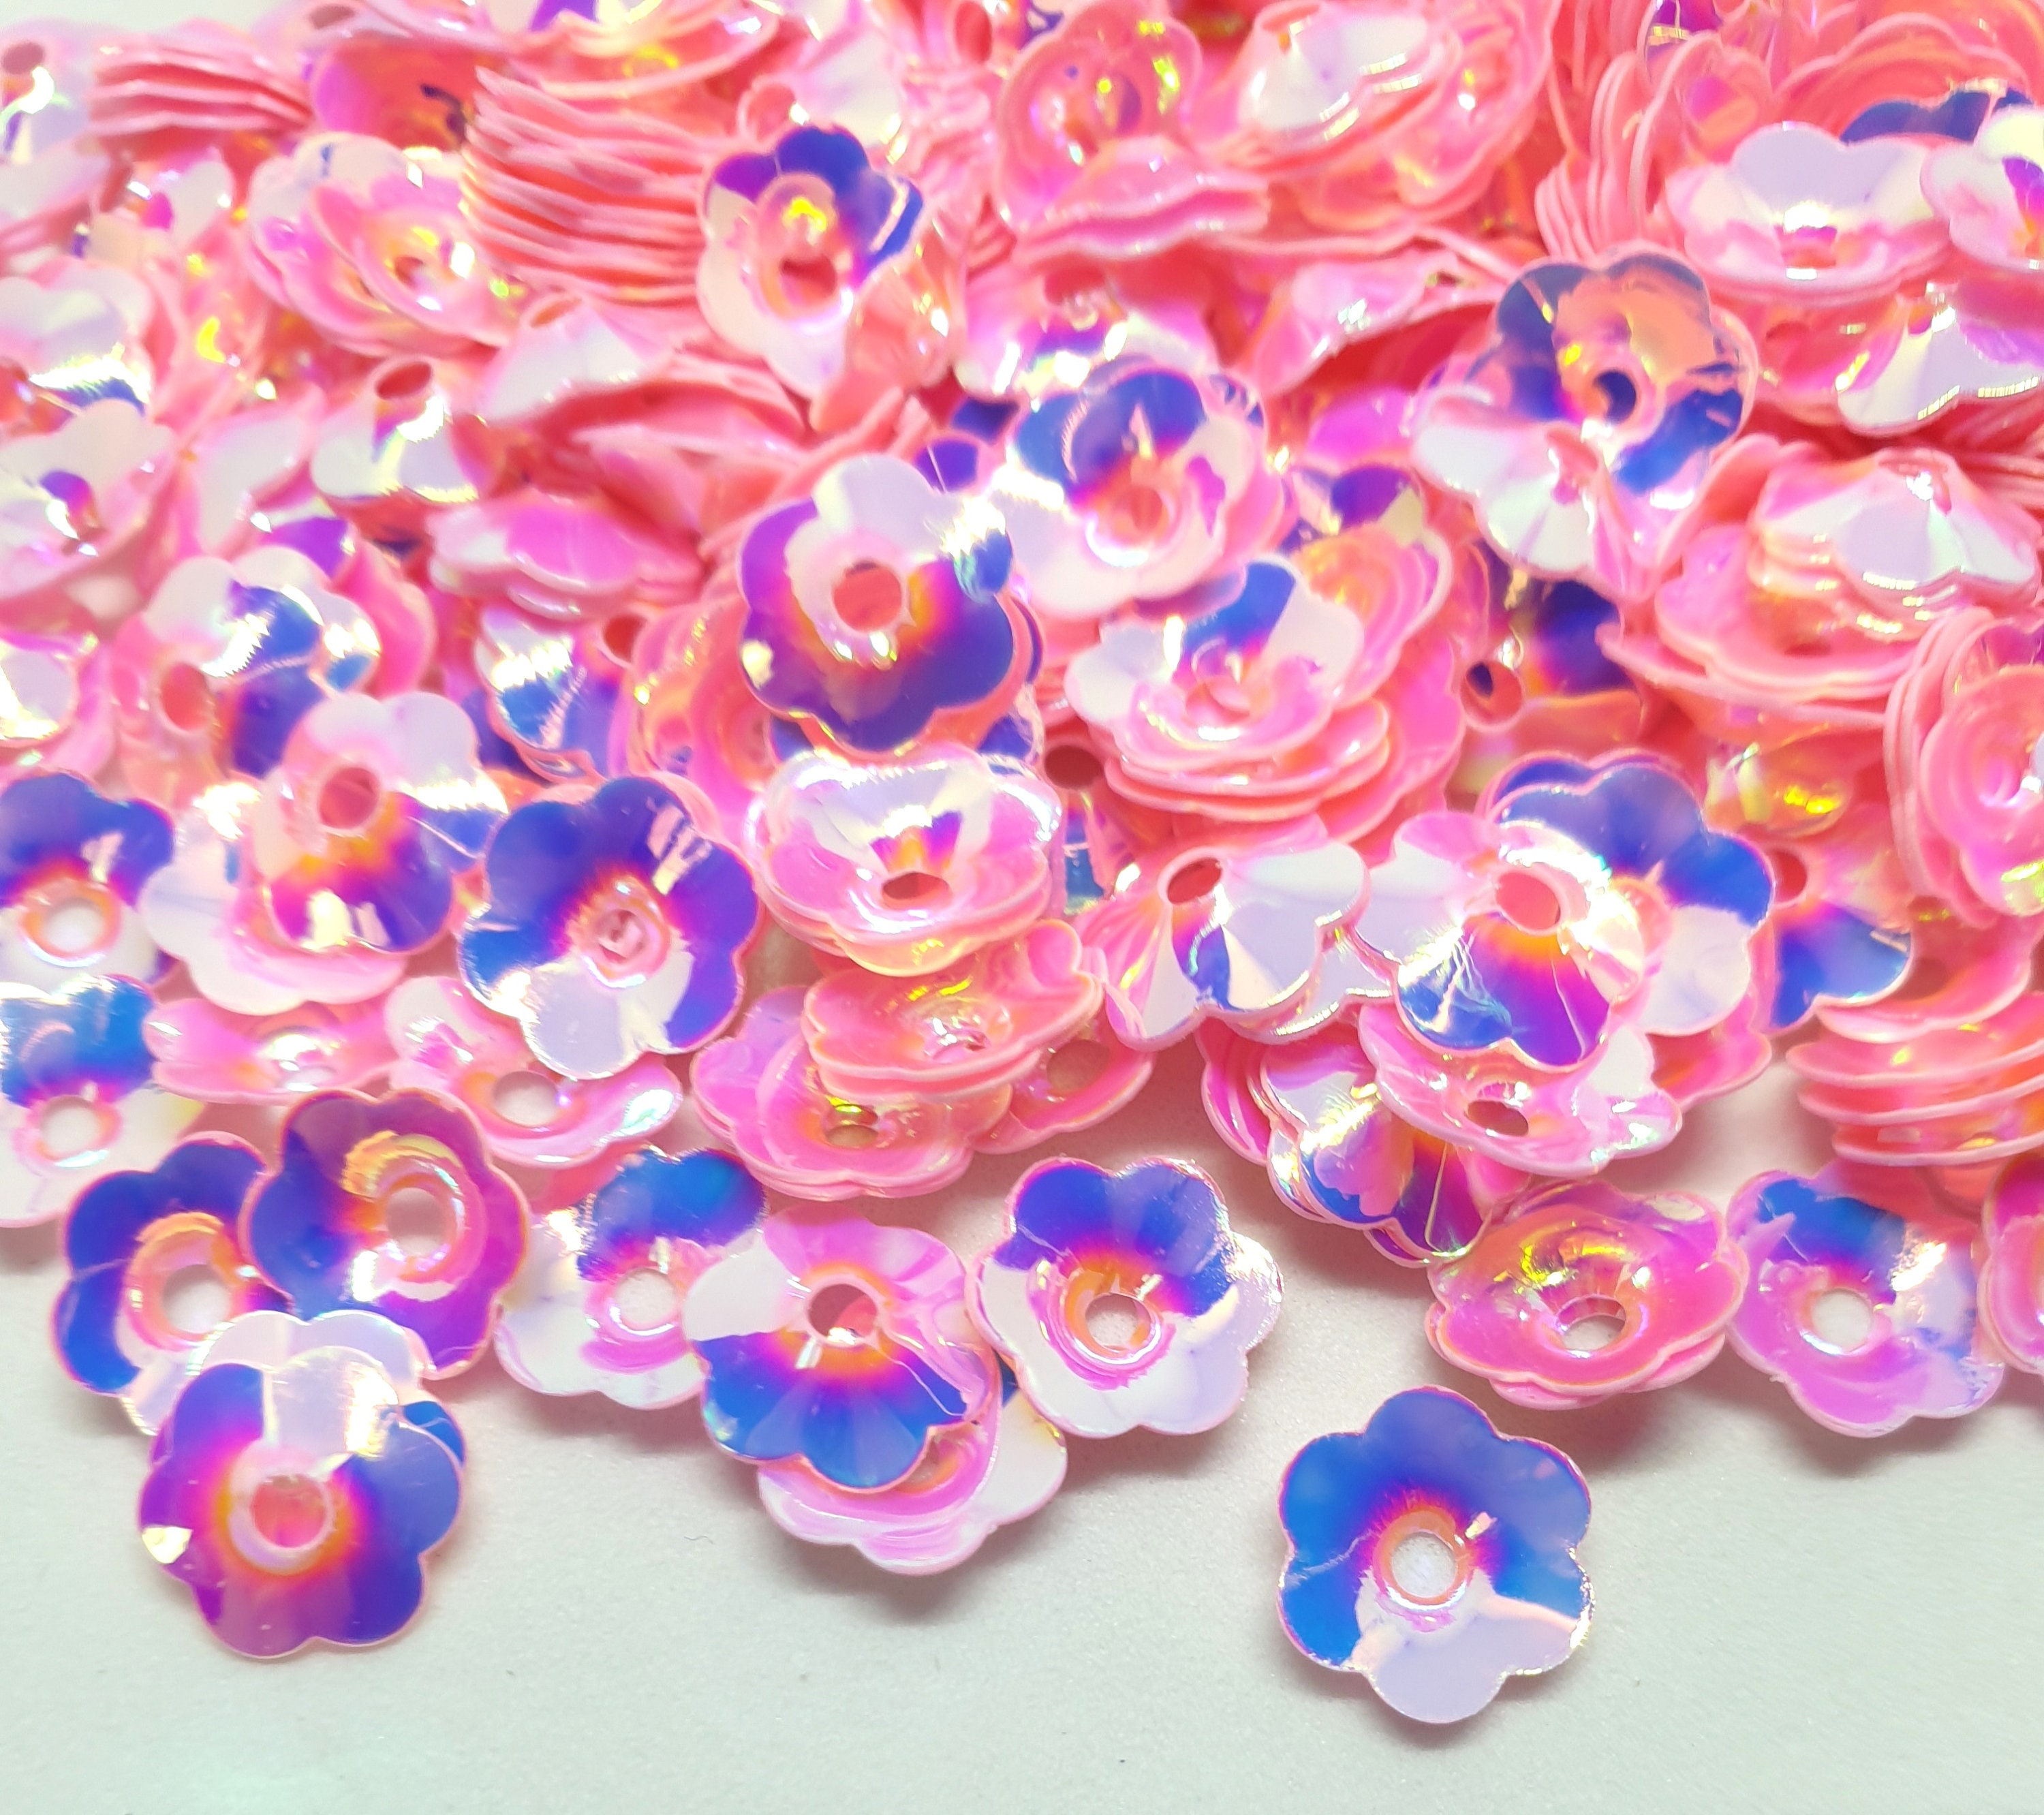 Pink AB Cup Flower Sequins 10mm 10g about 315pcs - Etsy UK